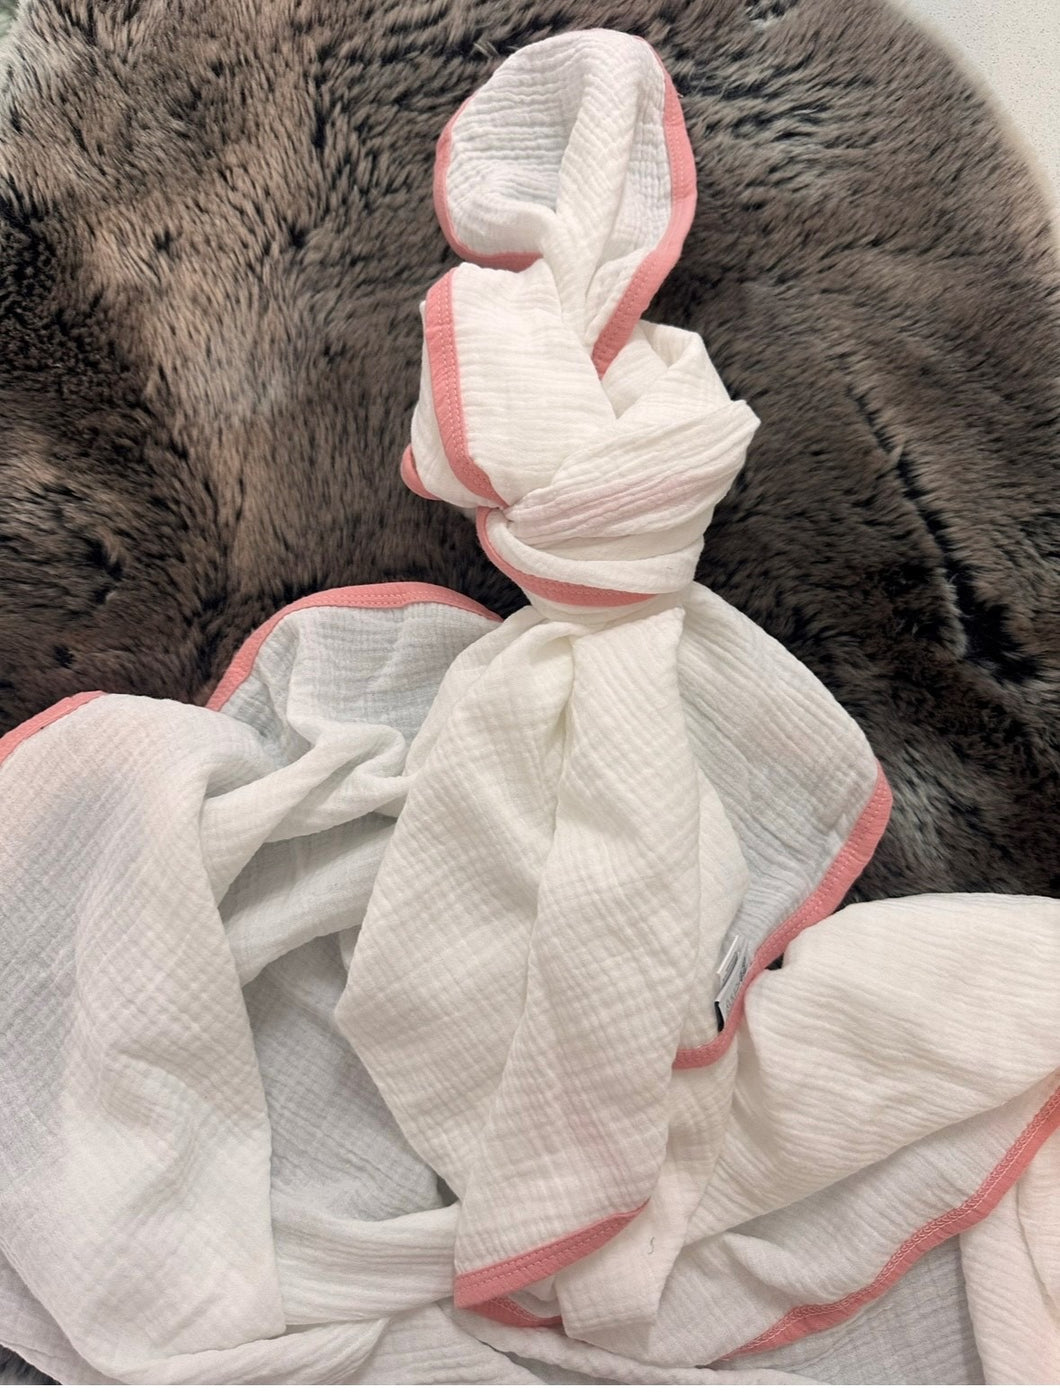 Extra large double muslin blanket - white and pink trim